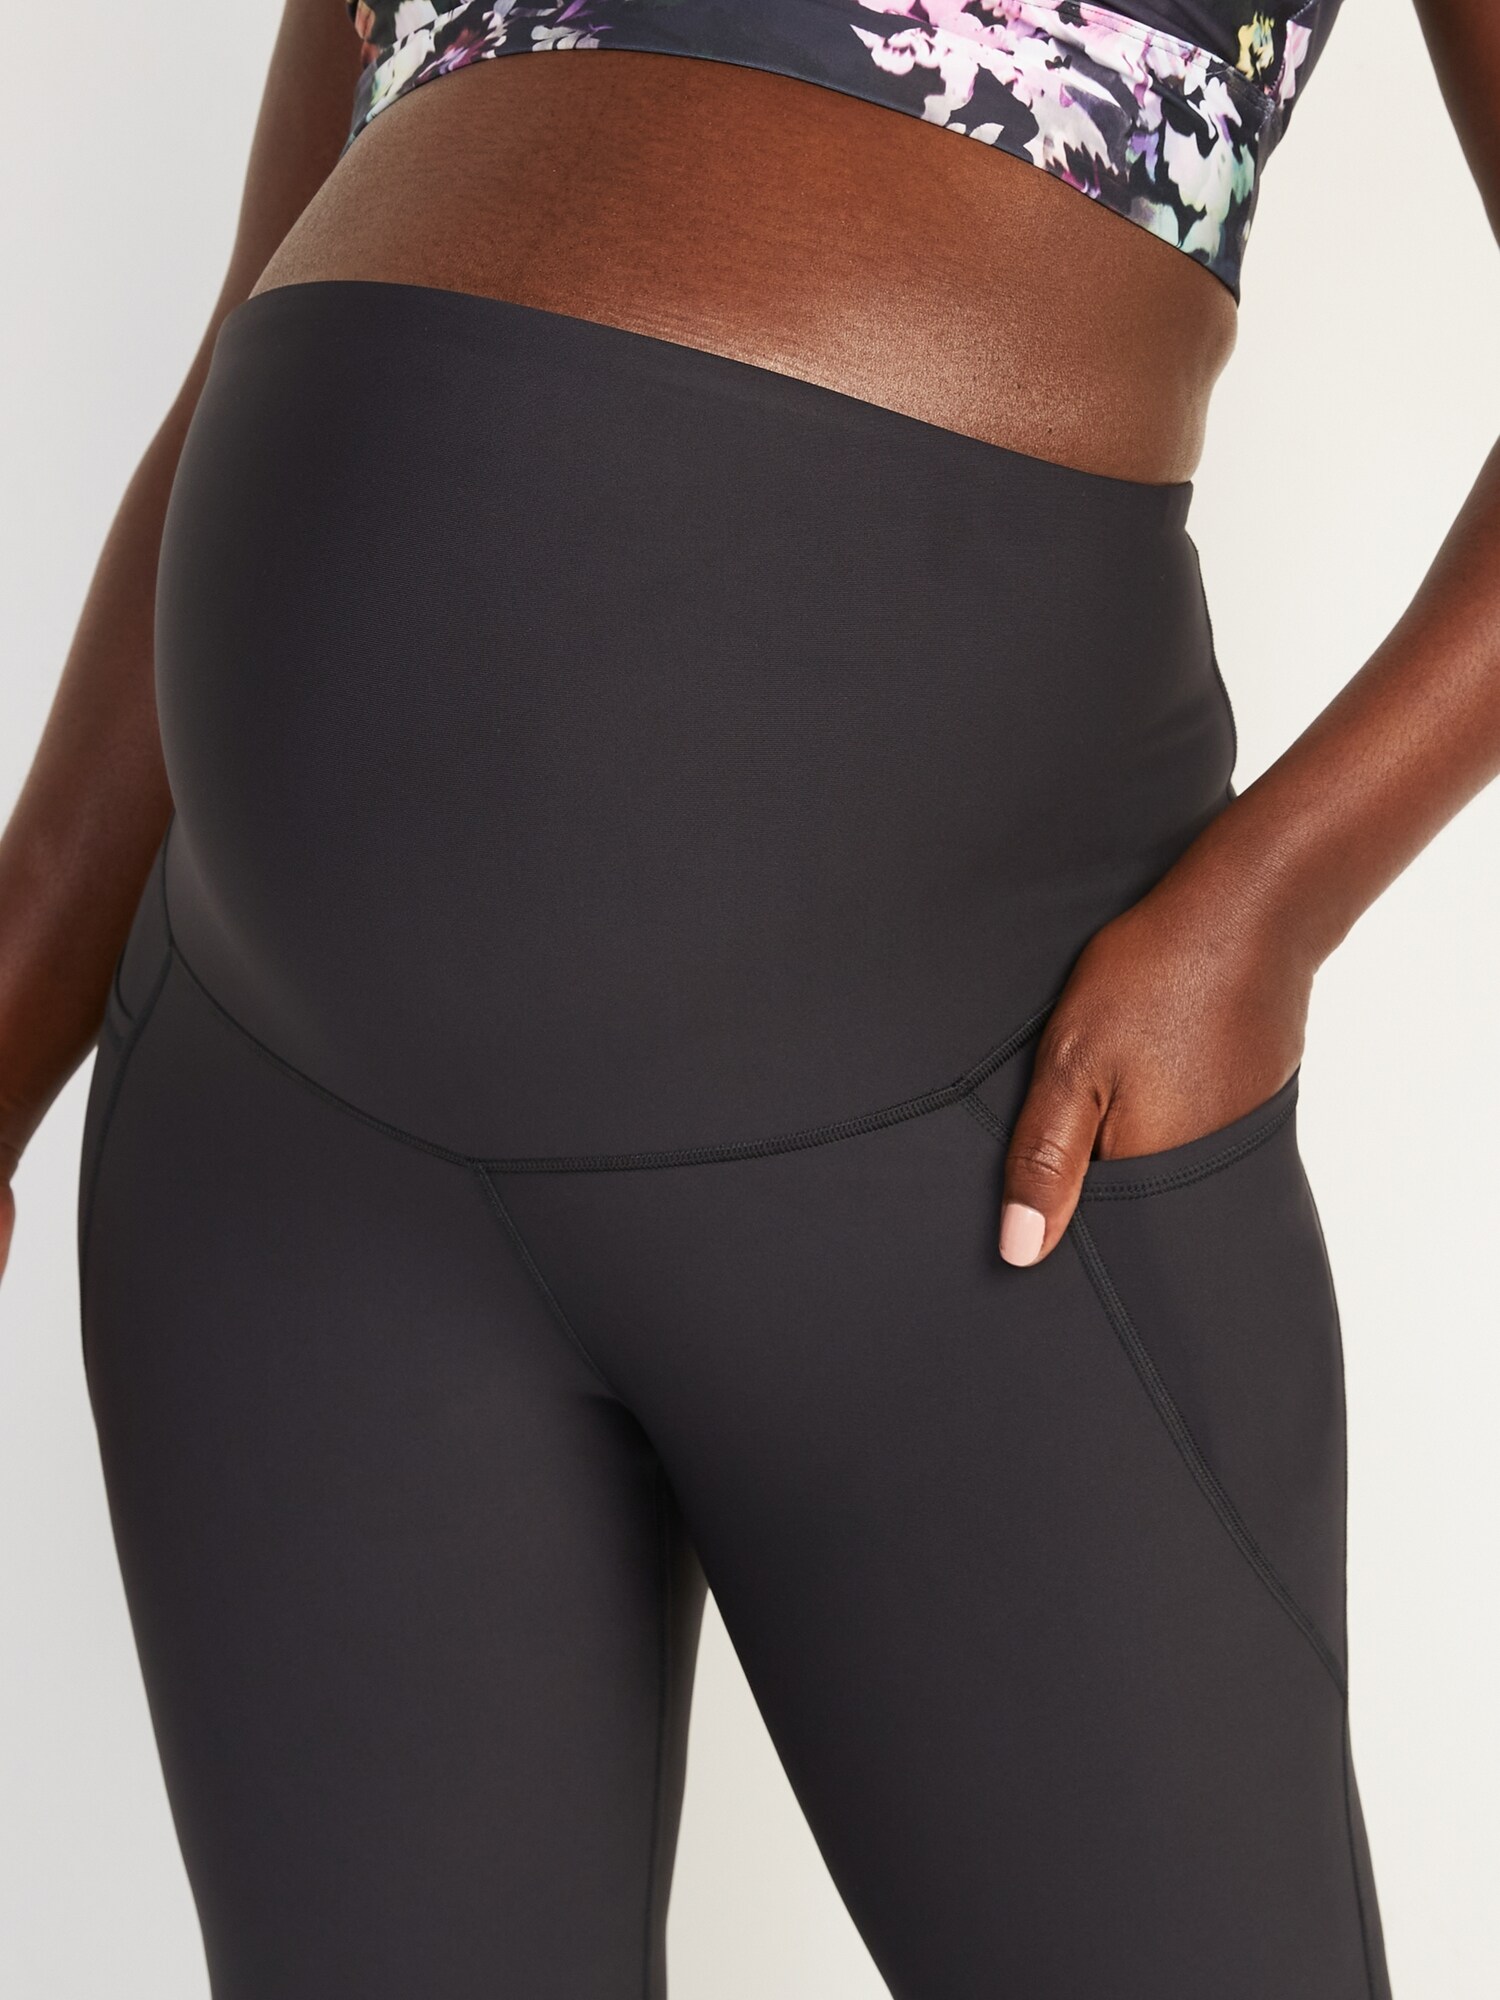 Fabletics Maternity Activewear Pants for Women for sale